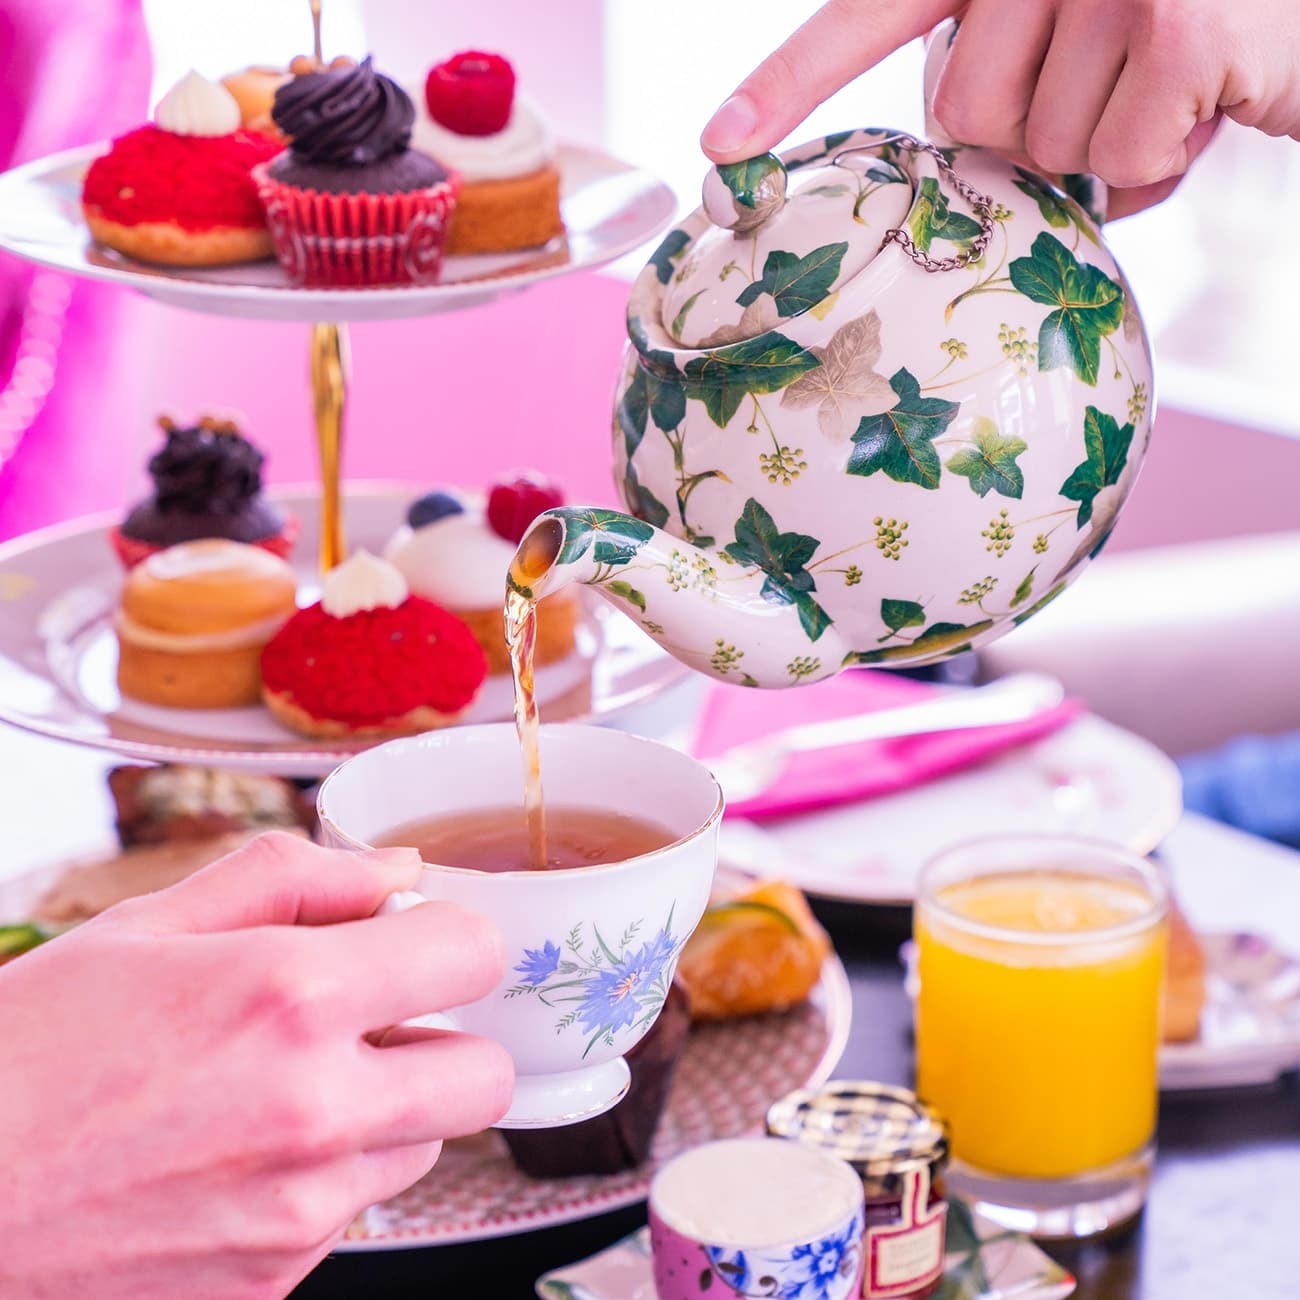 What's the difference between high tea and afternoon tea?